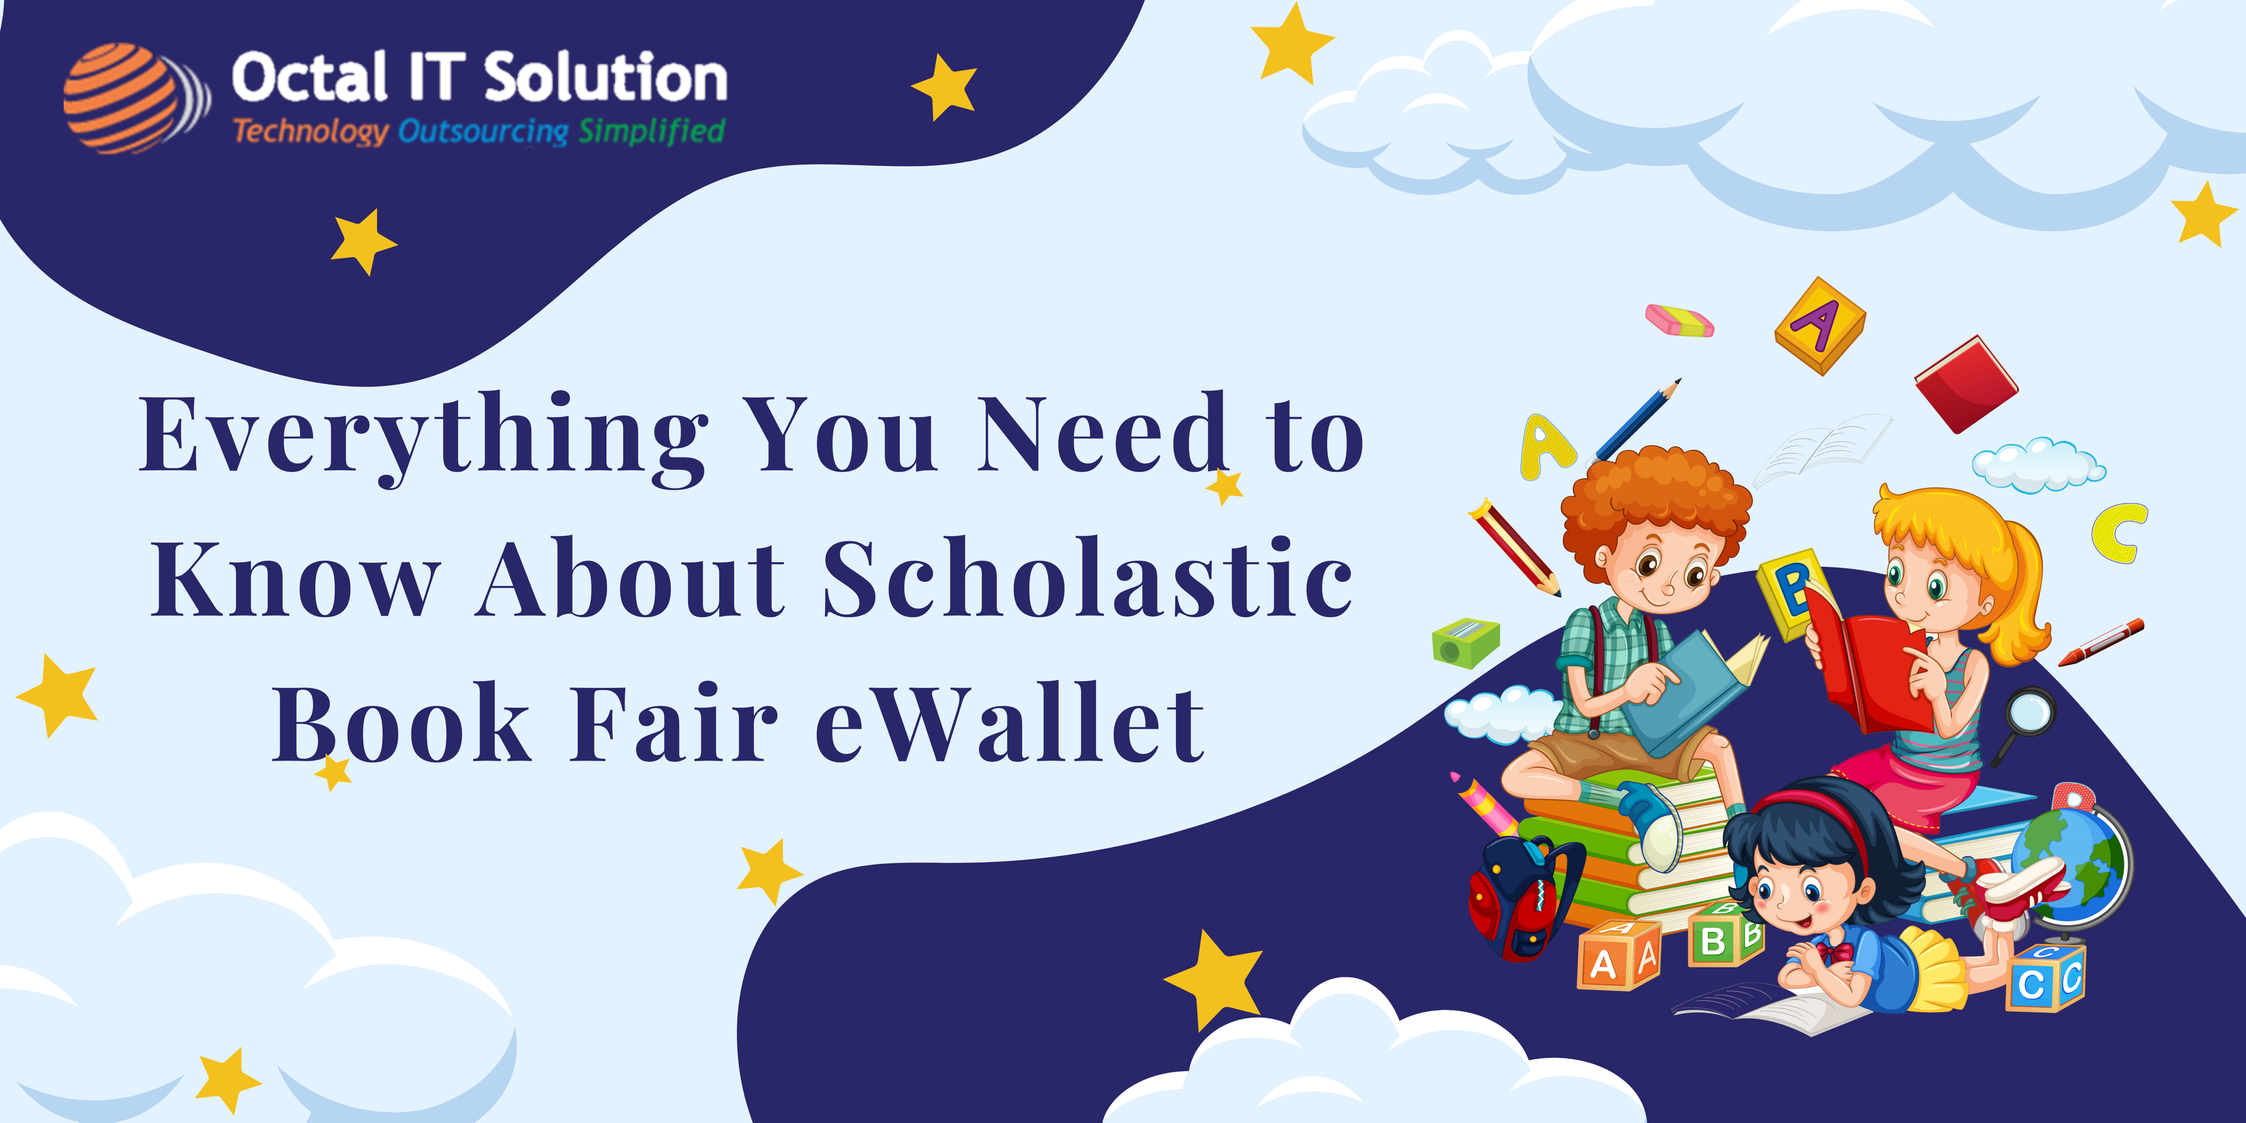 About Scholastic